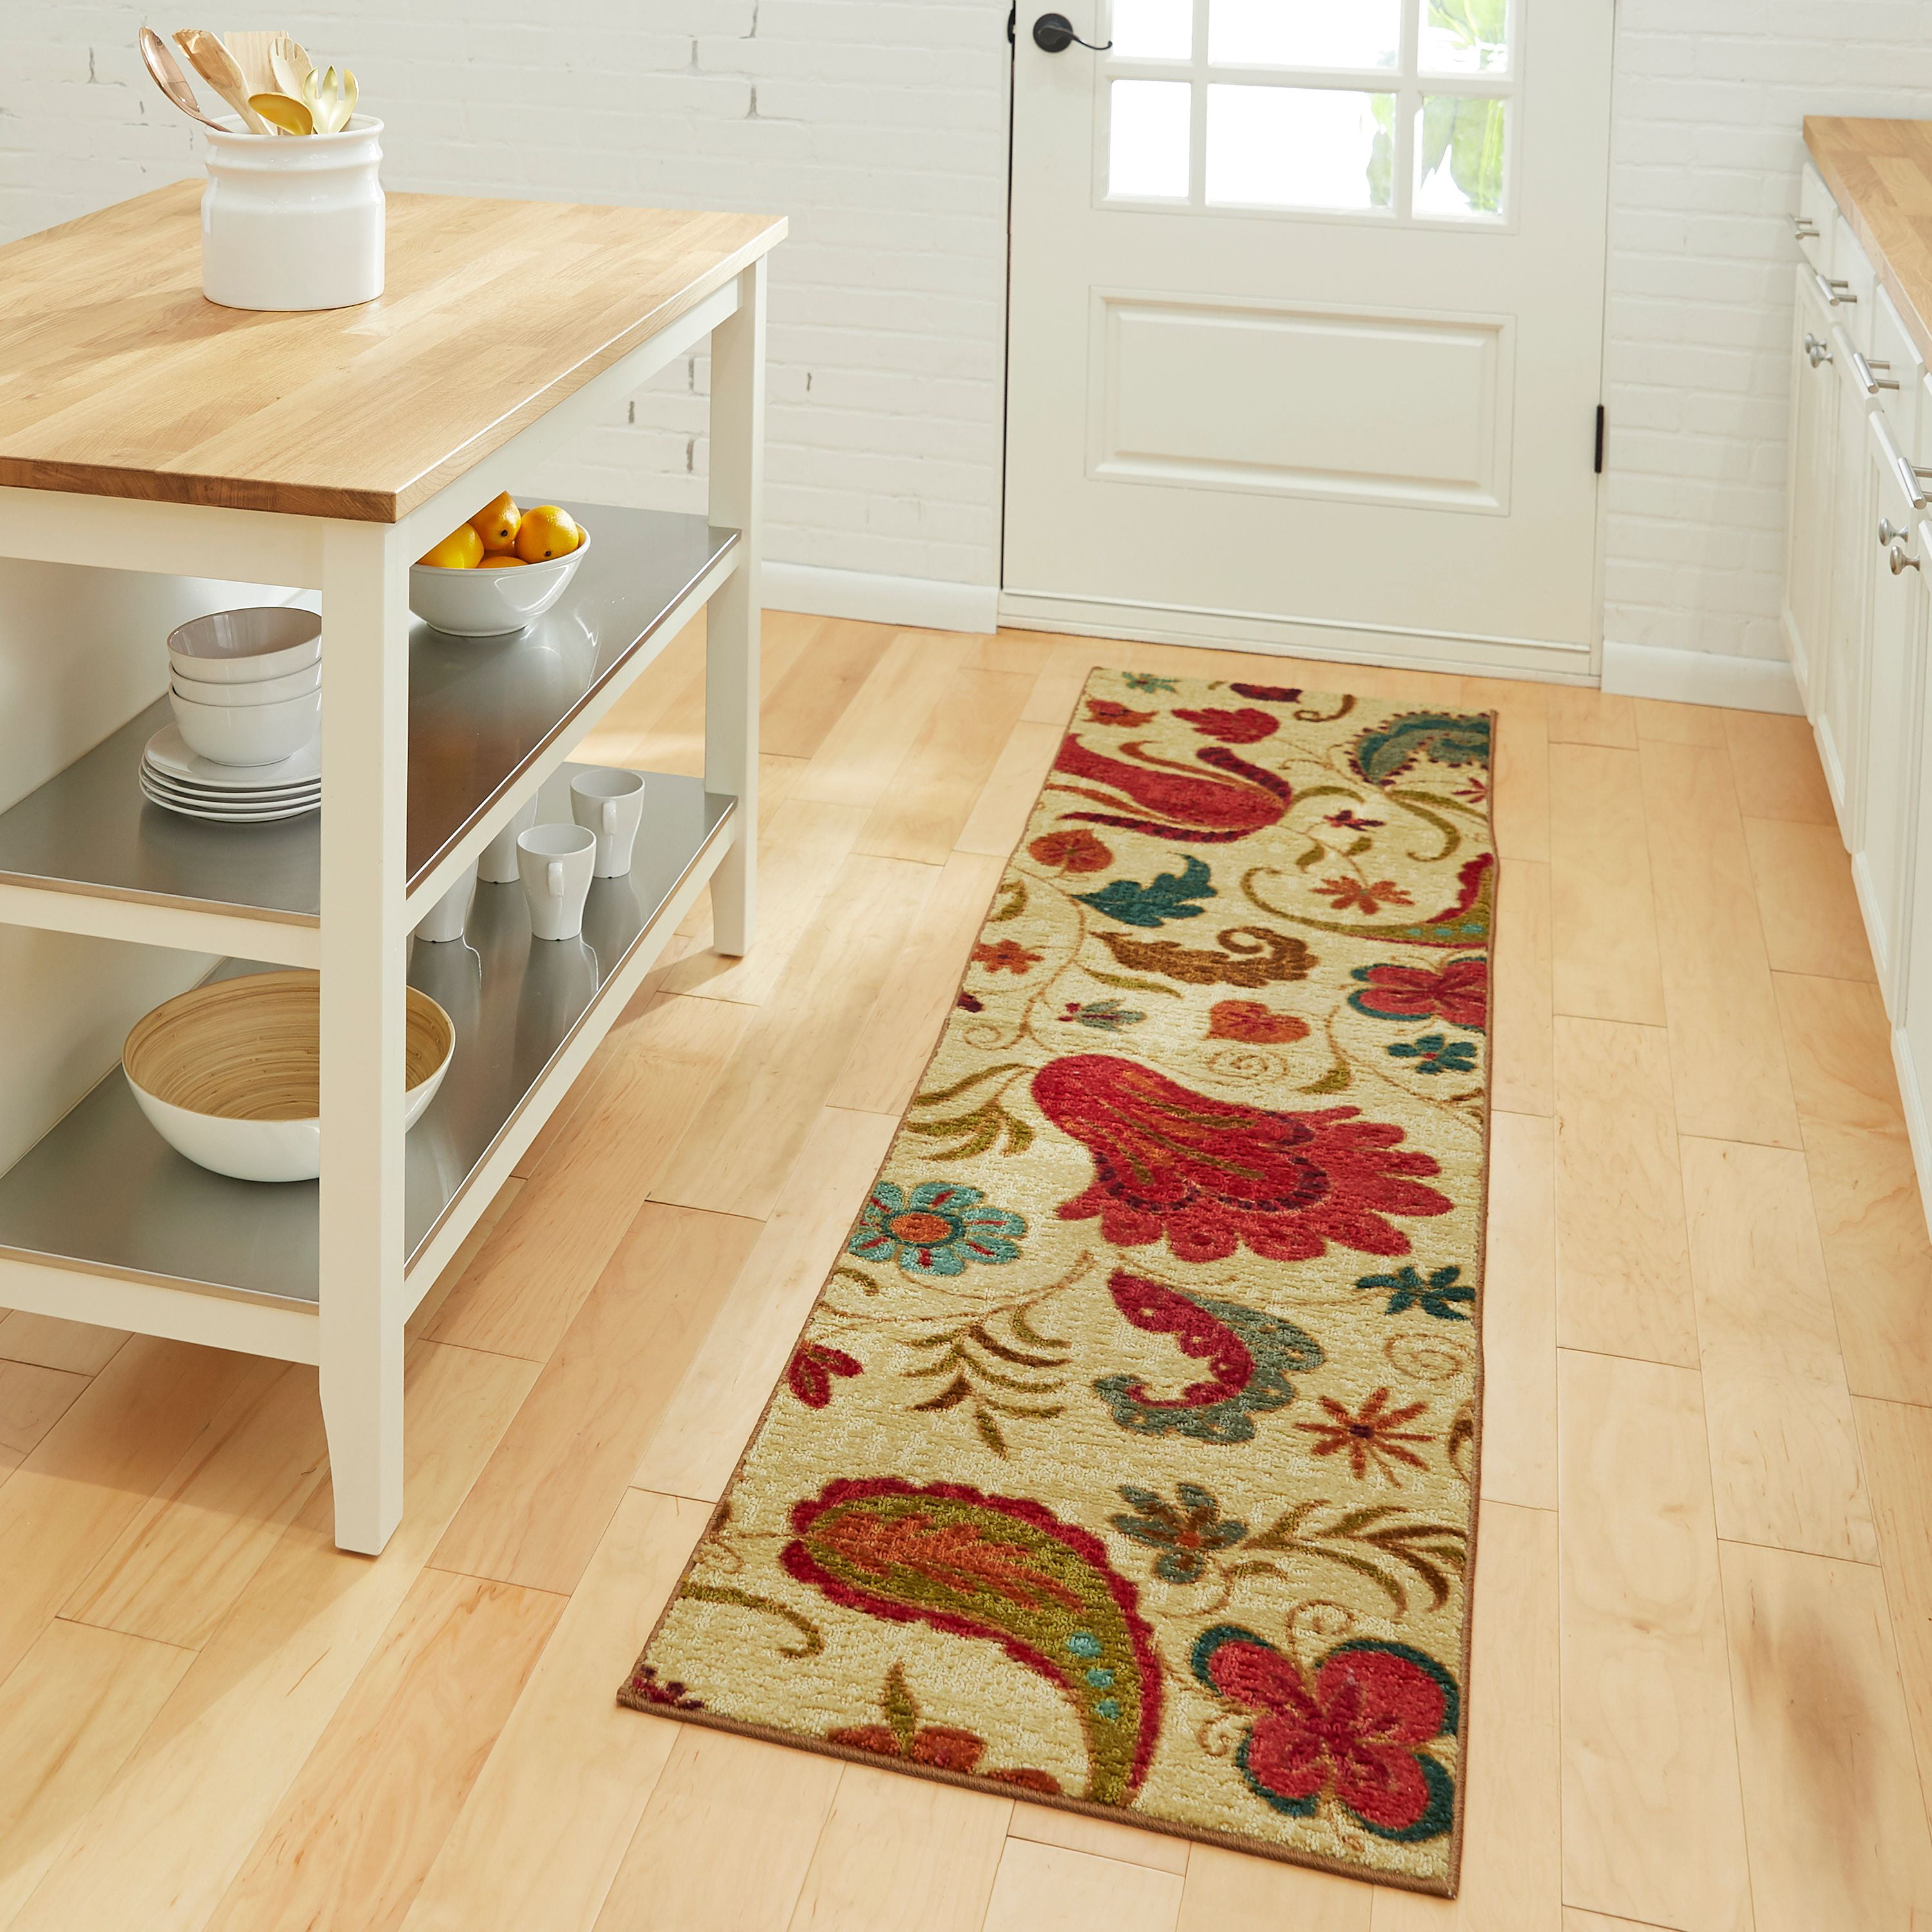 Mohawk Home Tropical Acres Floral Runner Rug, 2' x 8'